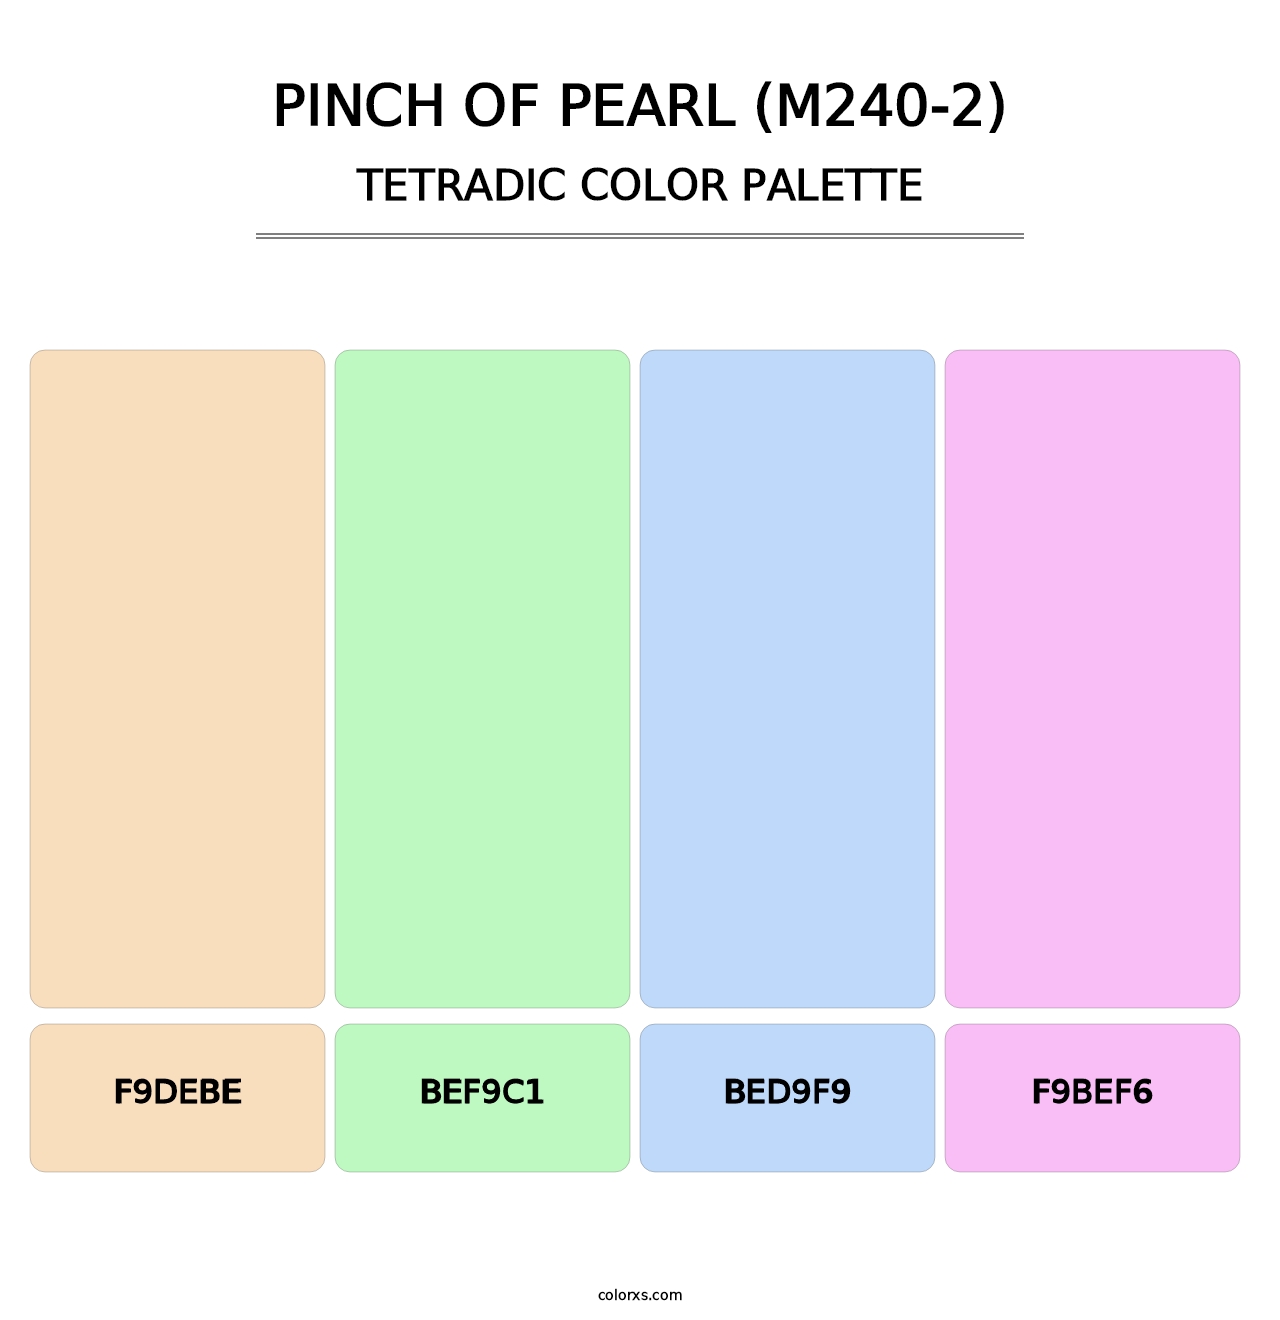 Pinch Of Pearl (M240-2) - Tetradic Color Palette